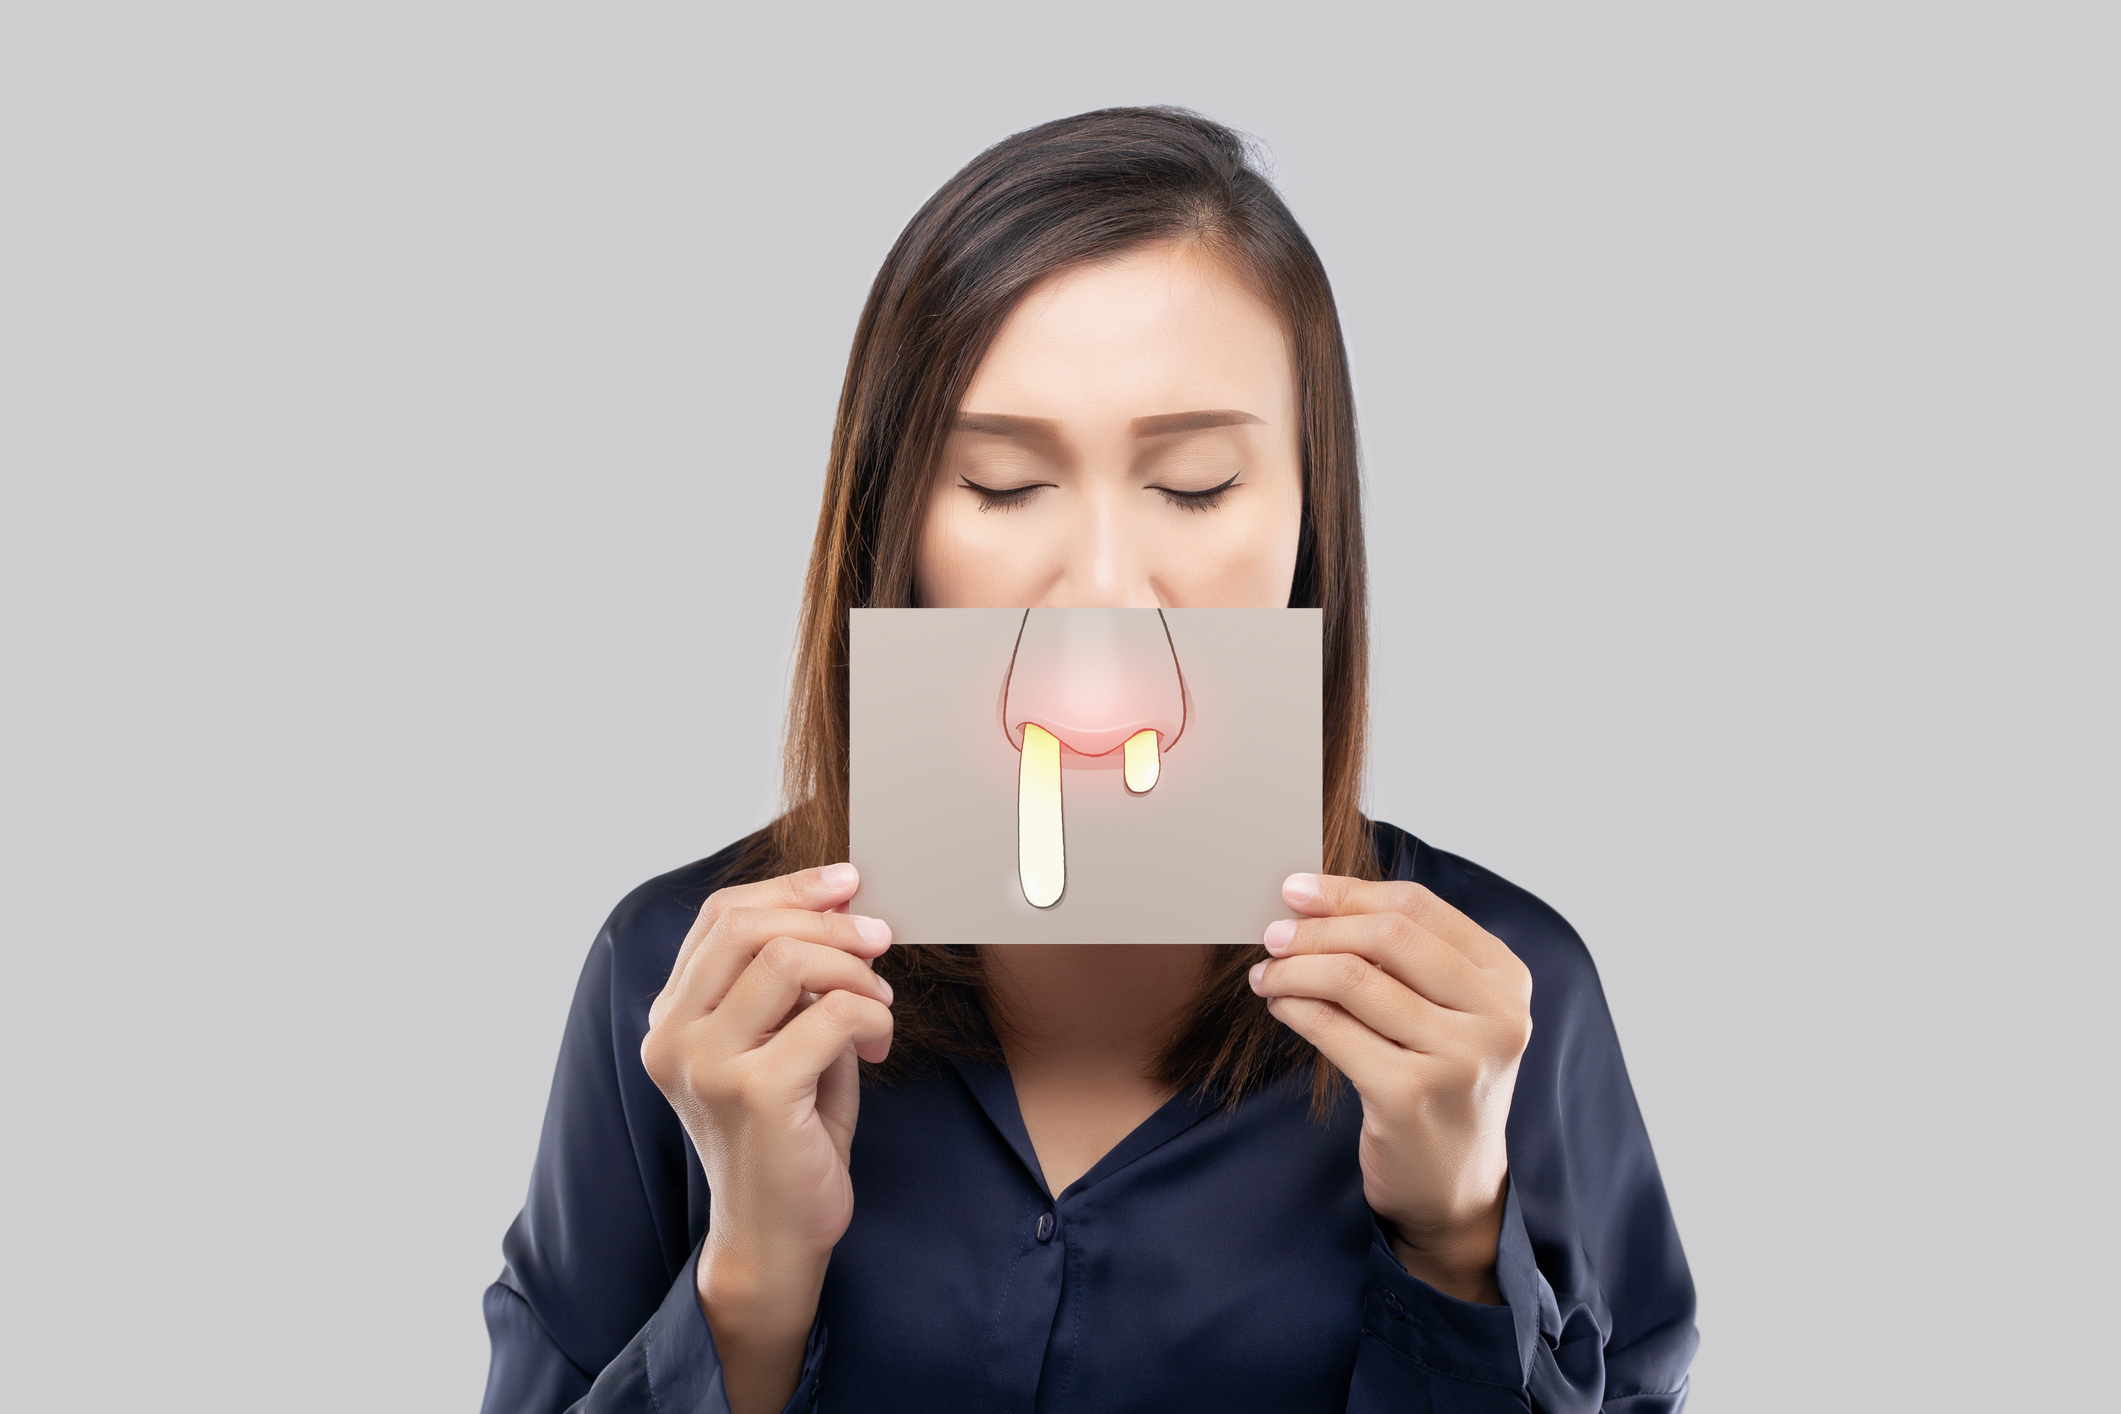 The surprising truth about the color of snot